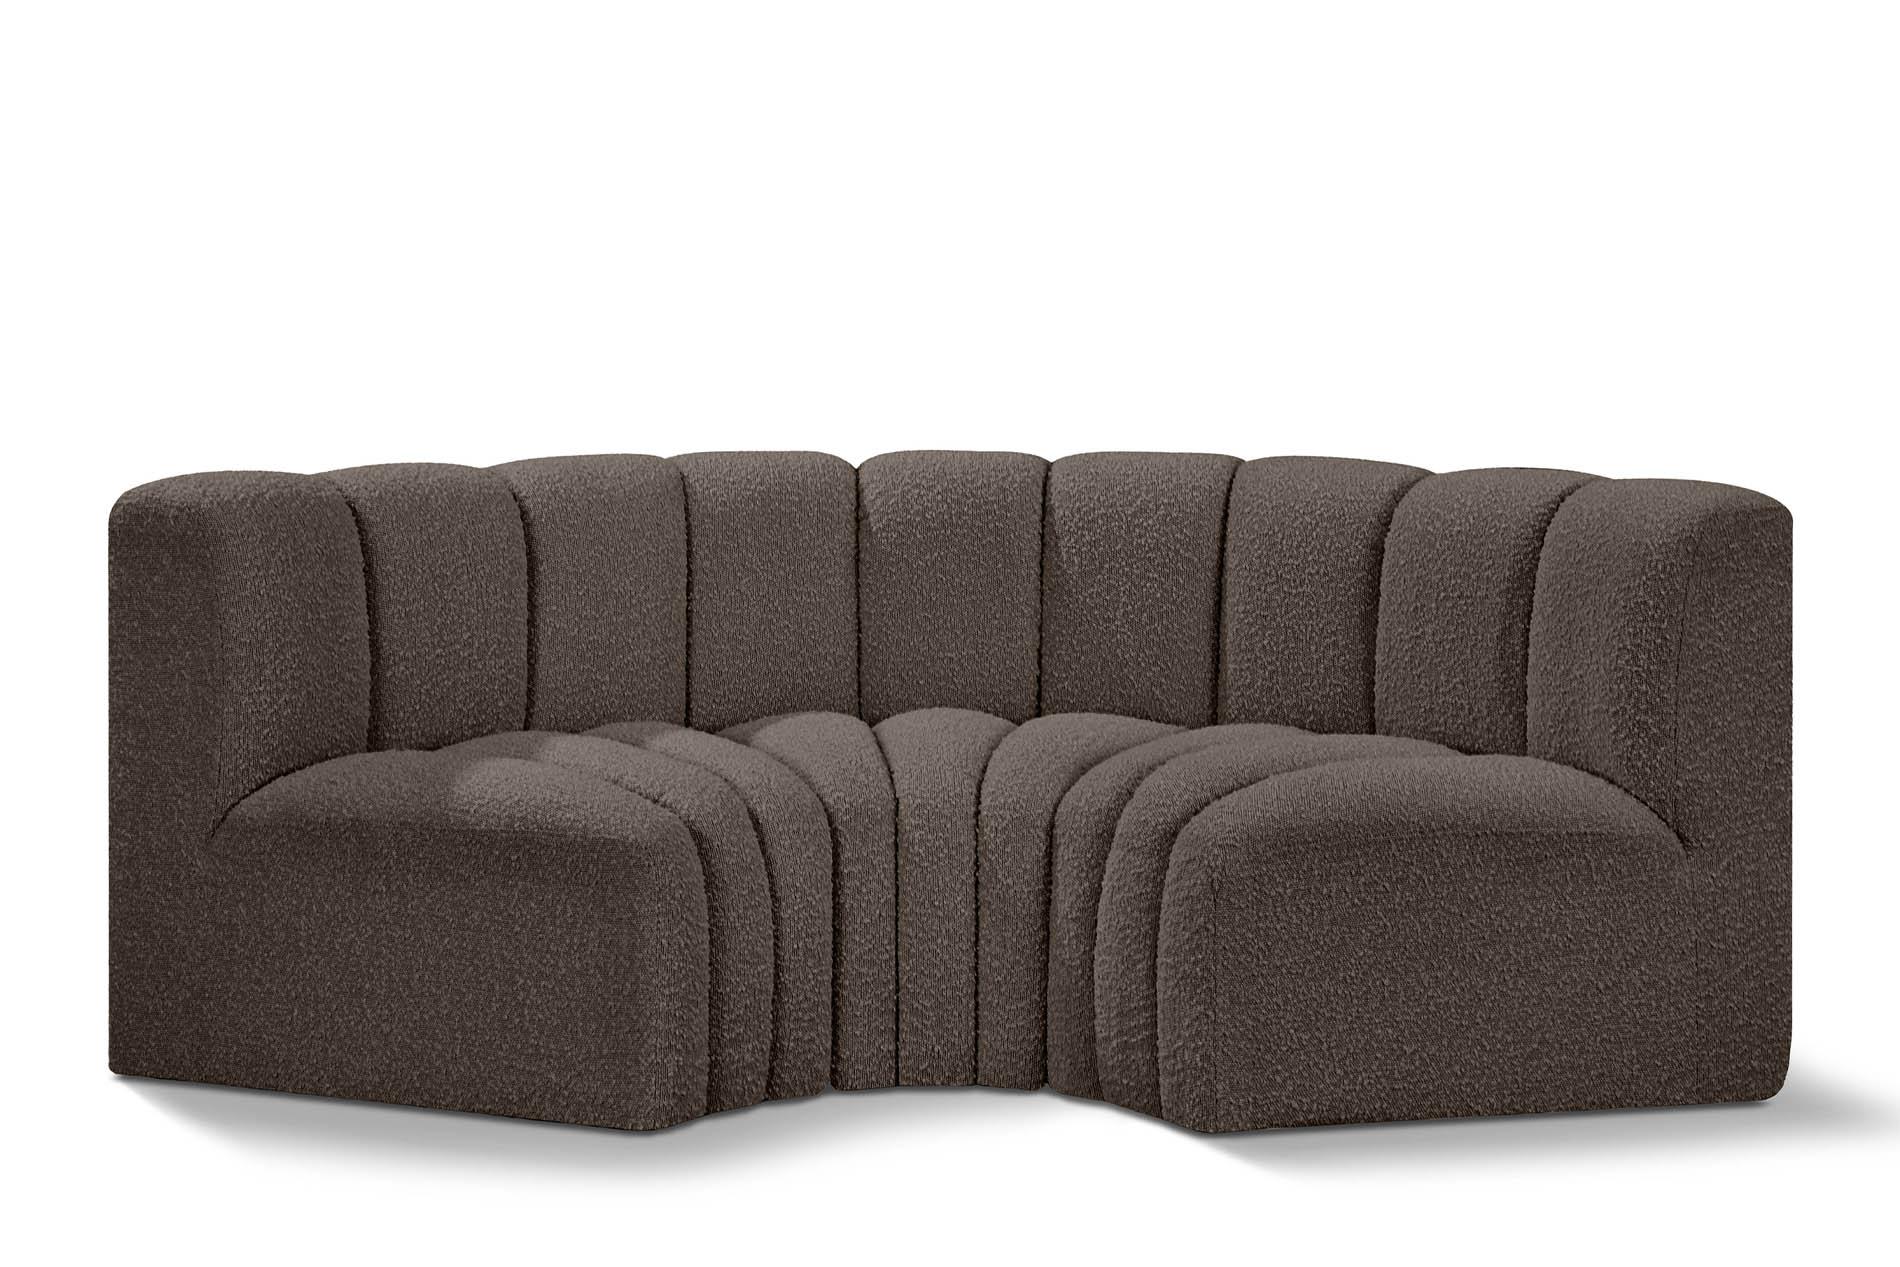 Contemporary, Modern Modular Sectional Sofa ARC 102Brown-S3C 102Brown-S3C in Brown 